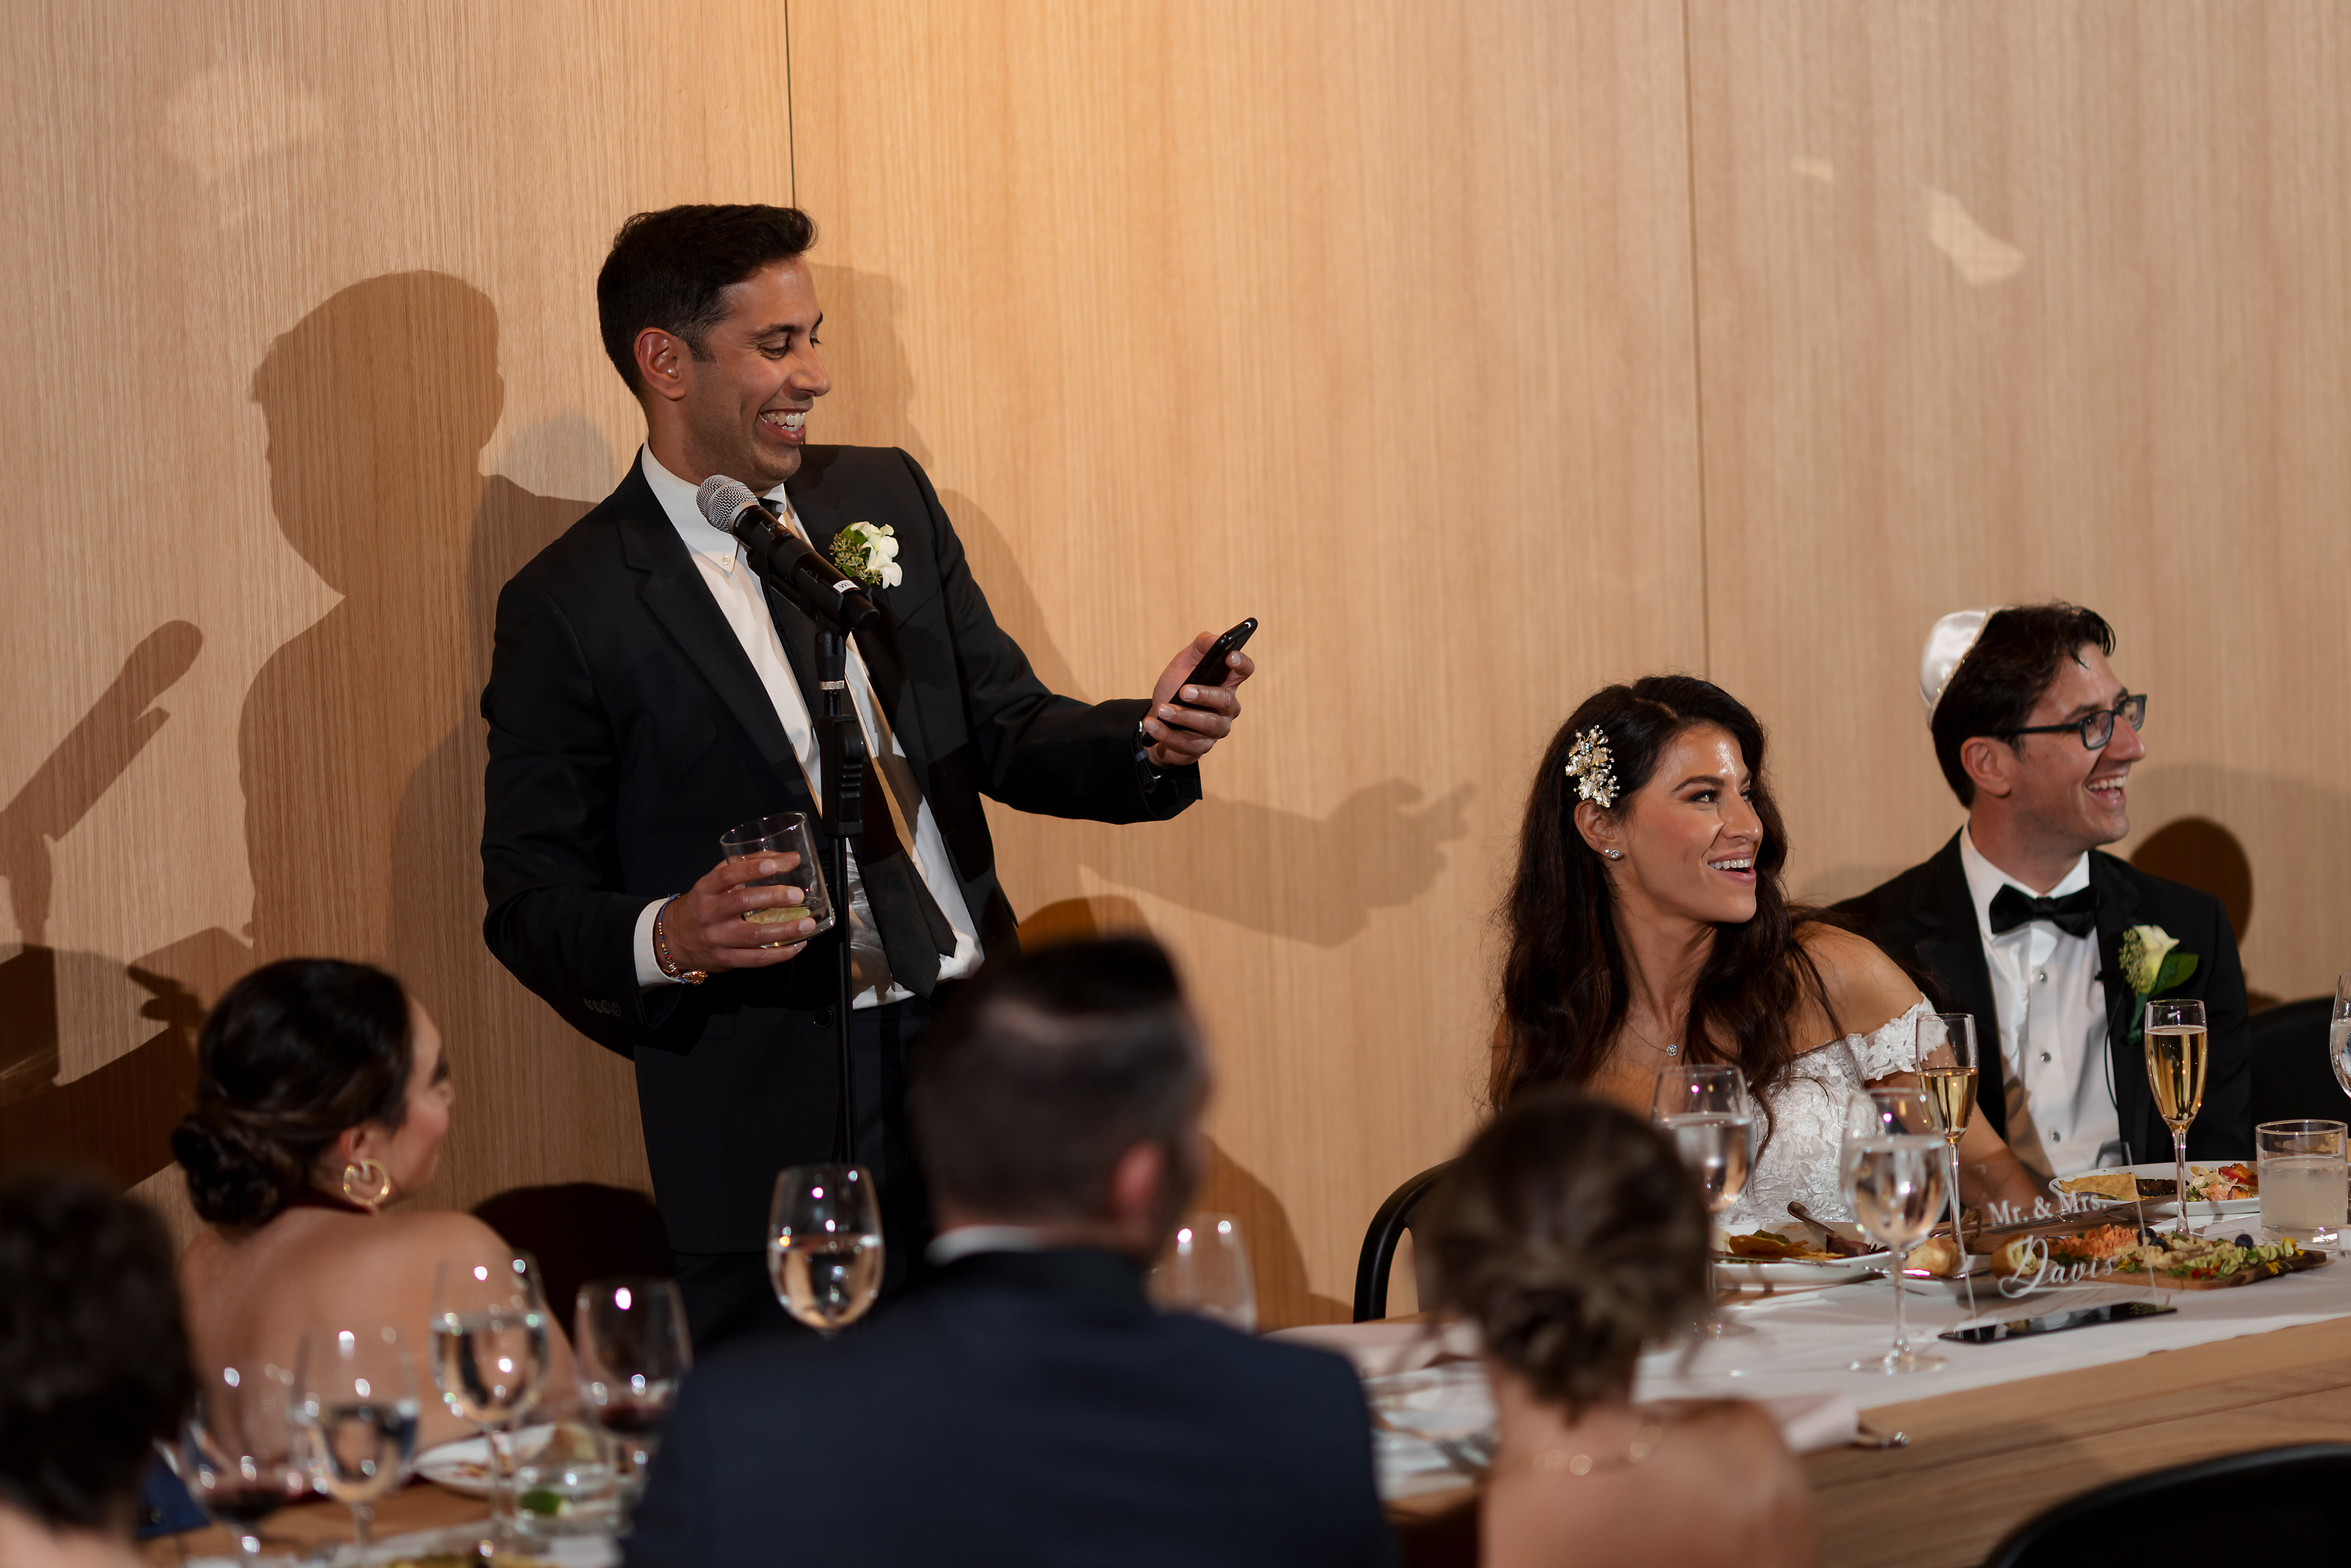 Groomsman gives toast during wedding reception at Sarabande in Chicago